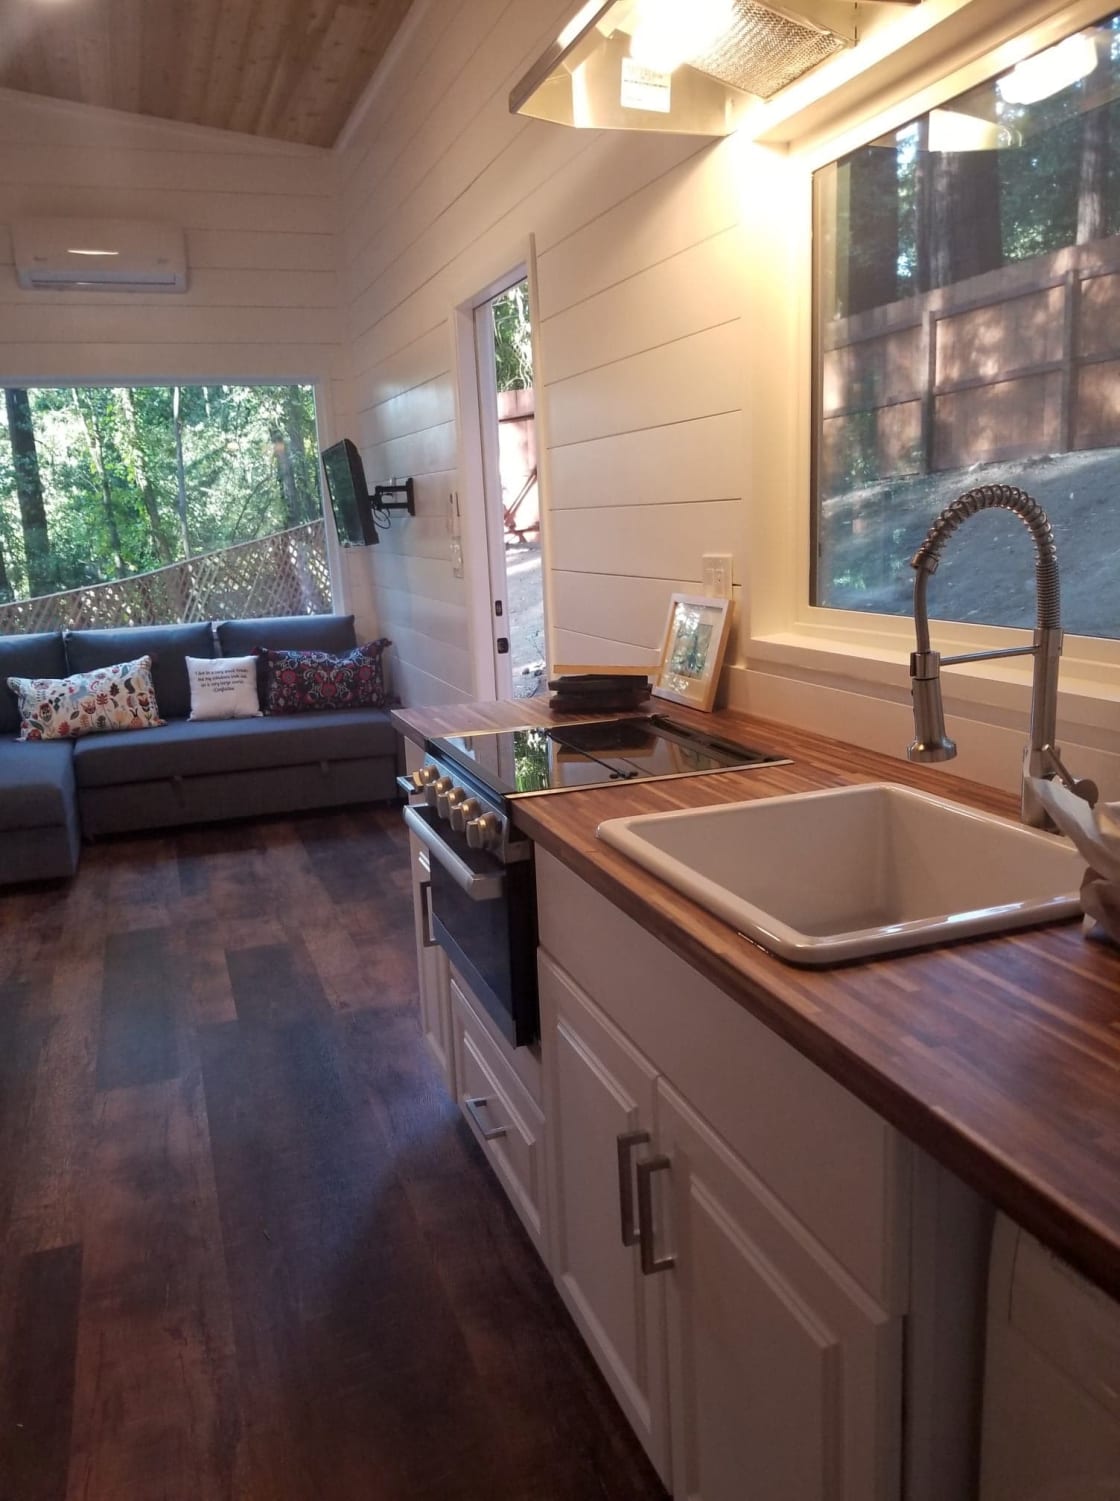 Tiny Home in the Redwoods!